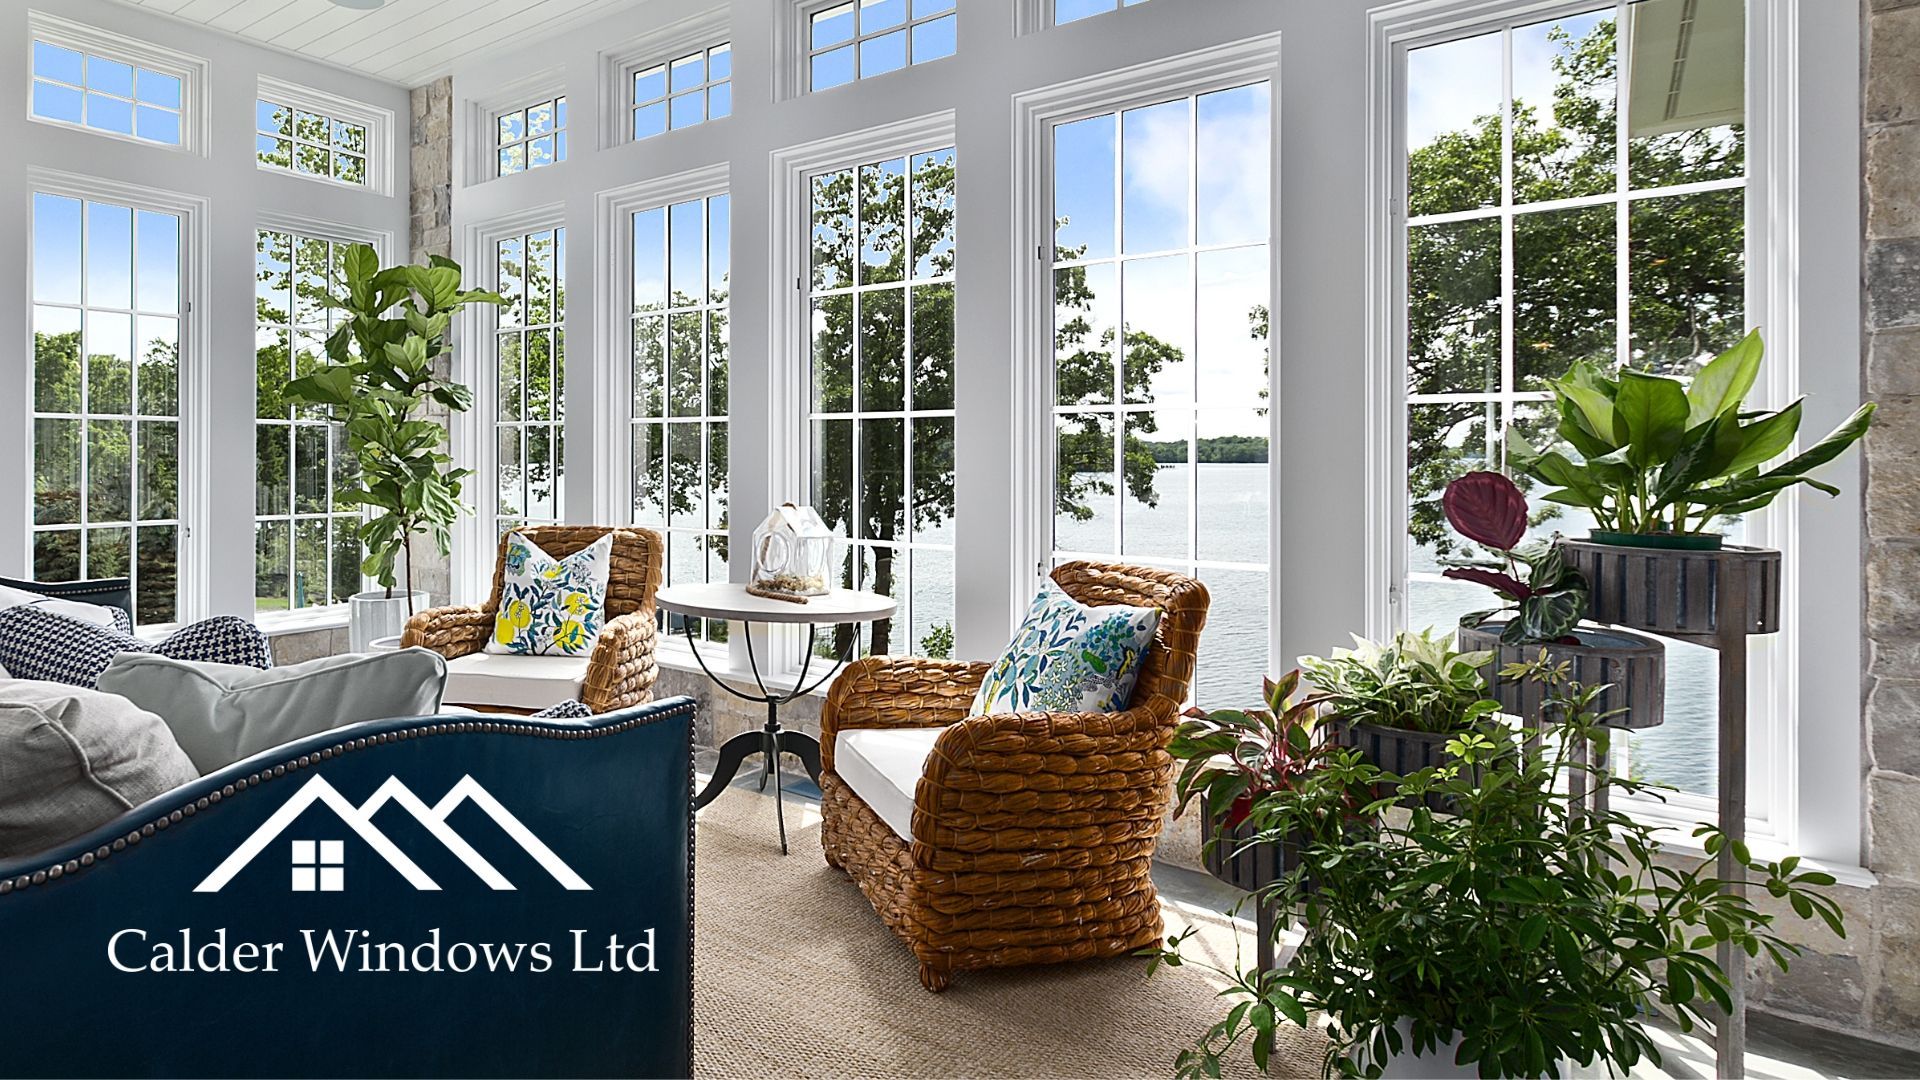 ​Your choice of windows has a big impact on the look and feel of your home. So, just how do you pick